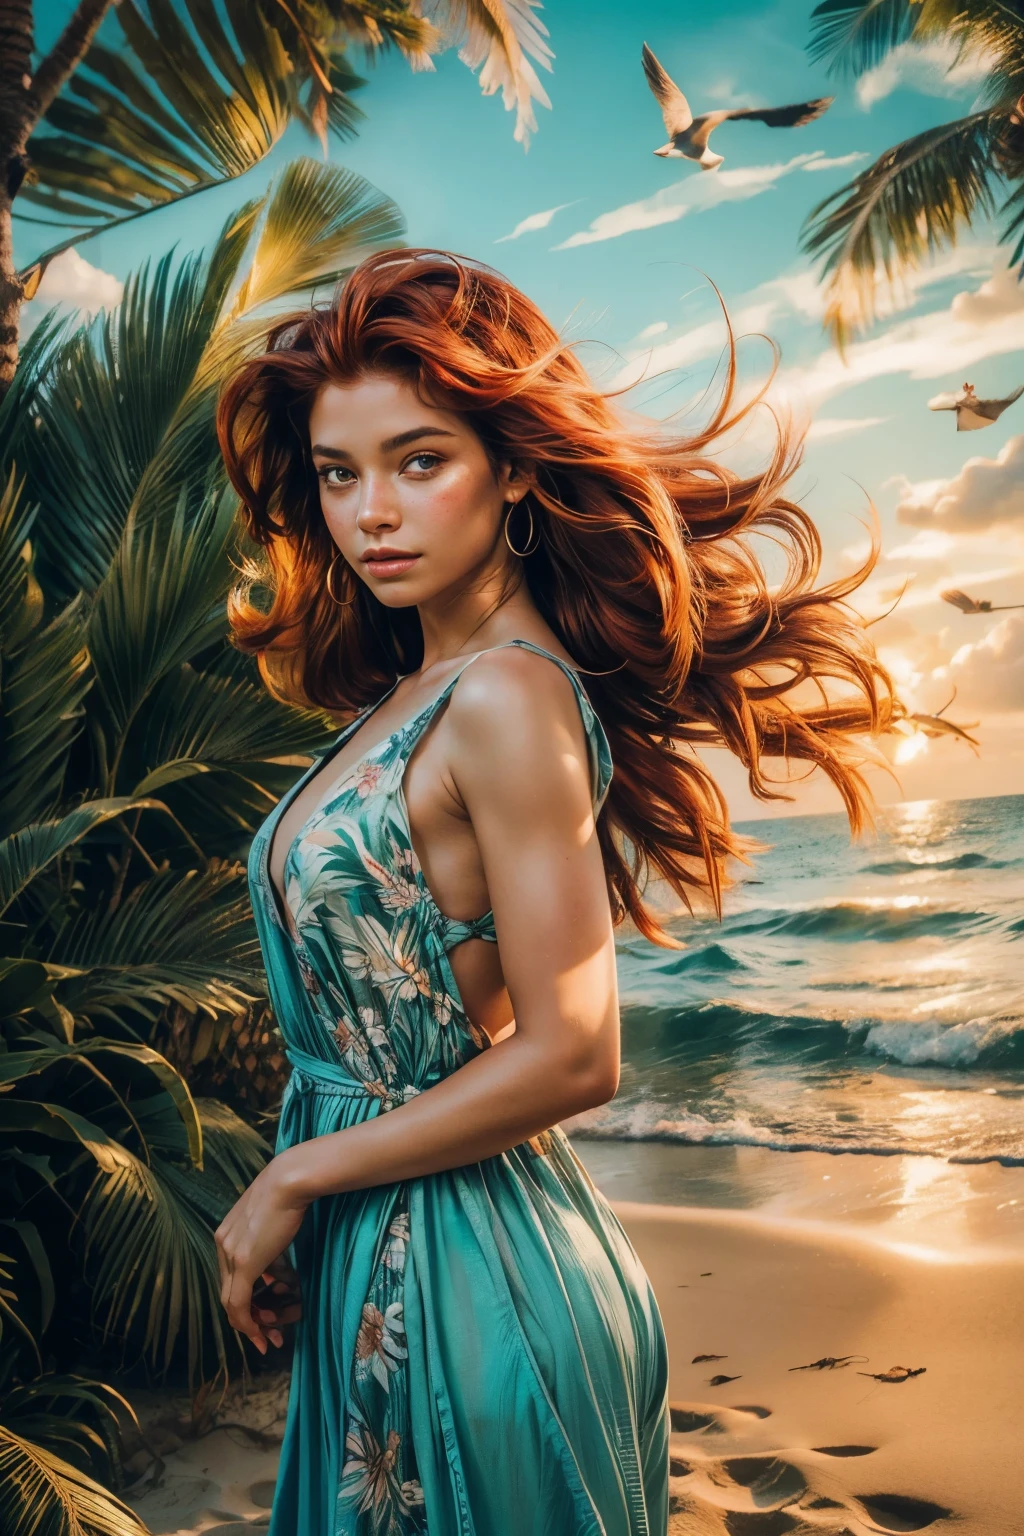 a girl with stunning red hair,standing alone on a deserted tropical island,surrounded by clear turquoise water and pristine sandy beaches,beautiful detailed eyes,long eyelashes,charming smile,flowing locks of red hair,soft and smooth skin,sun-kissed cheeks and freckles,a sense of curiosity and adventure in her eyes,seagulls flying above her, palm trees swaying gently in the breeze, exotic flowers blooming, colorful tropical birds chirping,colorful sunset casting a warm glow on the horizon,her dress flowing in the wind, barefoot in the warm sand,waves crashing gently on the shore, the sound of ocean waves calming her soul,the distant sound of a ship's horn,a sense of solitude and serenity, a longing for companionship and discovery,highres,ultra-detailed,photorealistic rendering with vivid colors and sharp focus,capturing the beauty of the girl and the enchanting nature of the island,stunning portrait with a touch of fantasy and mystery,a masterpiece of art that captures the viewer's imagination.